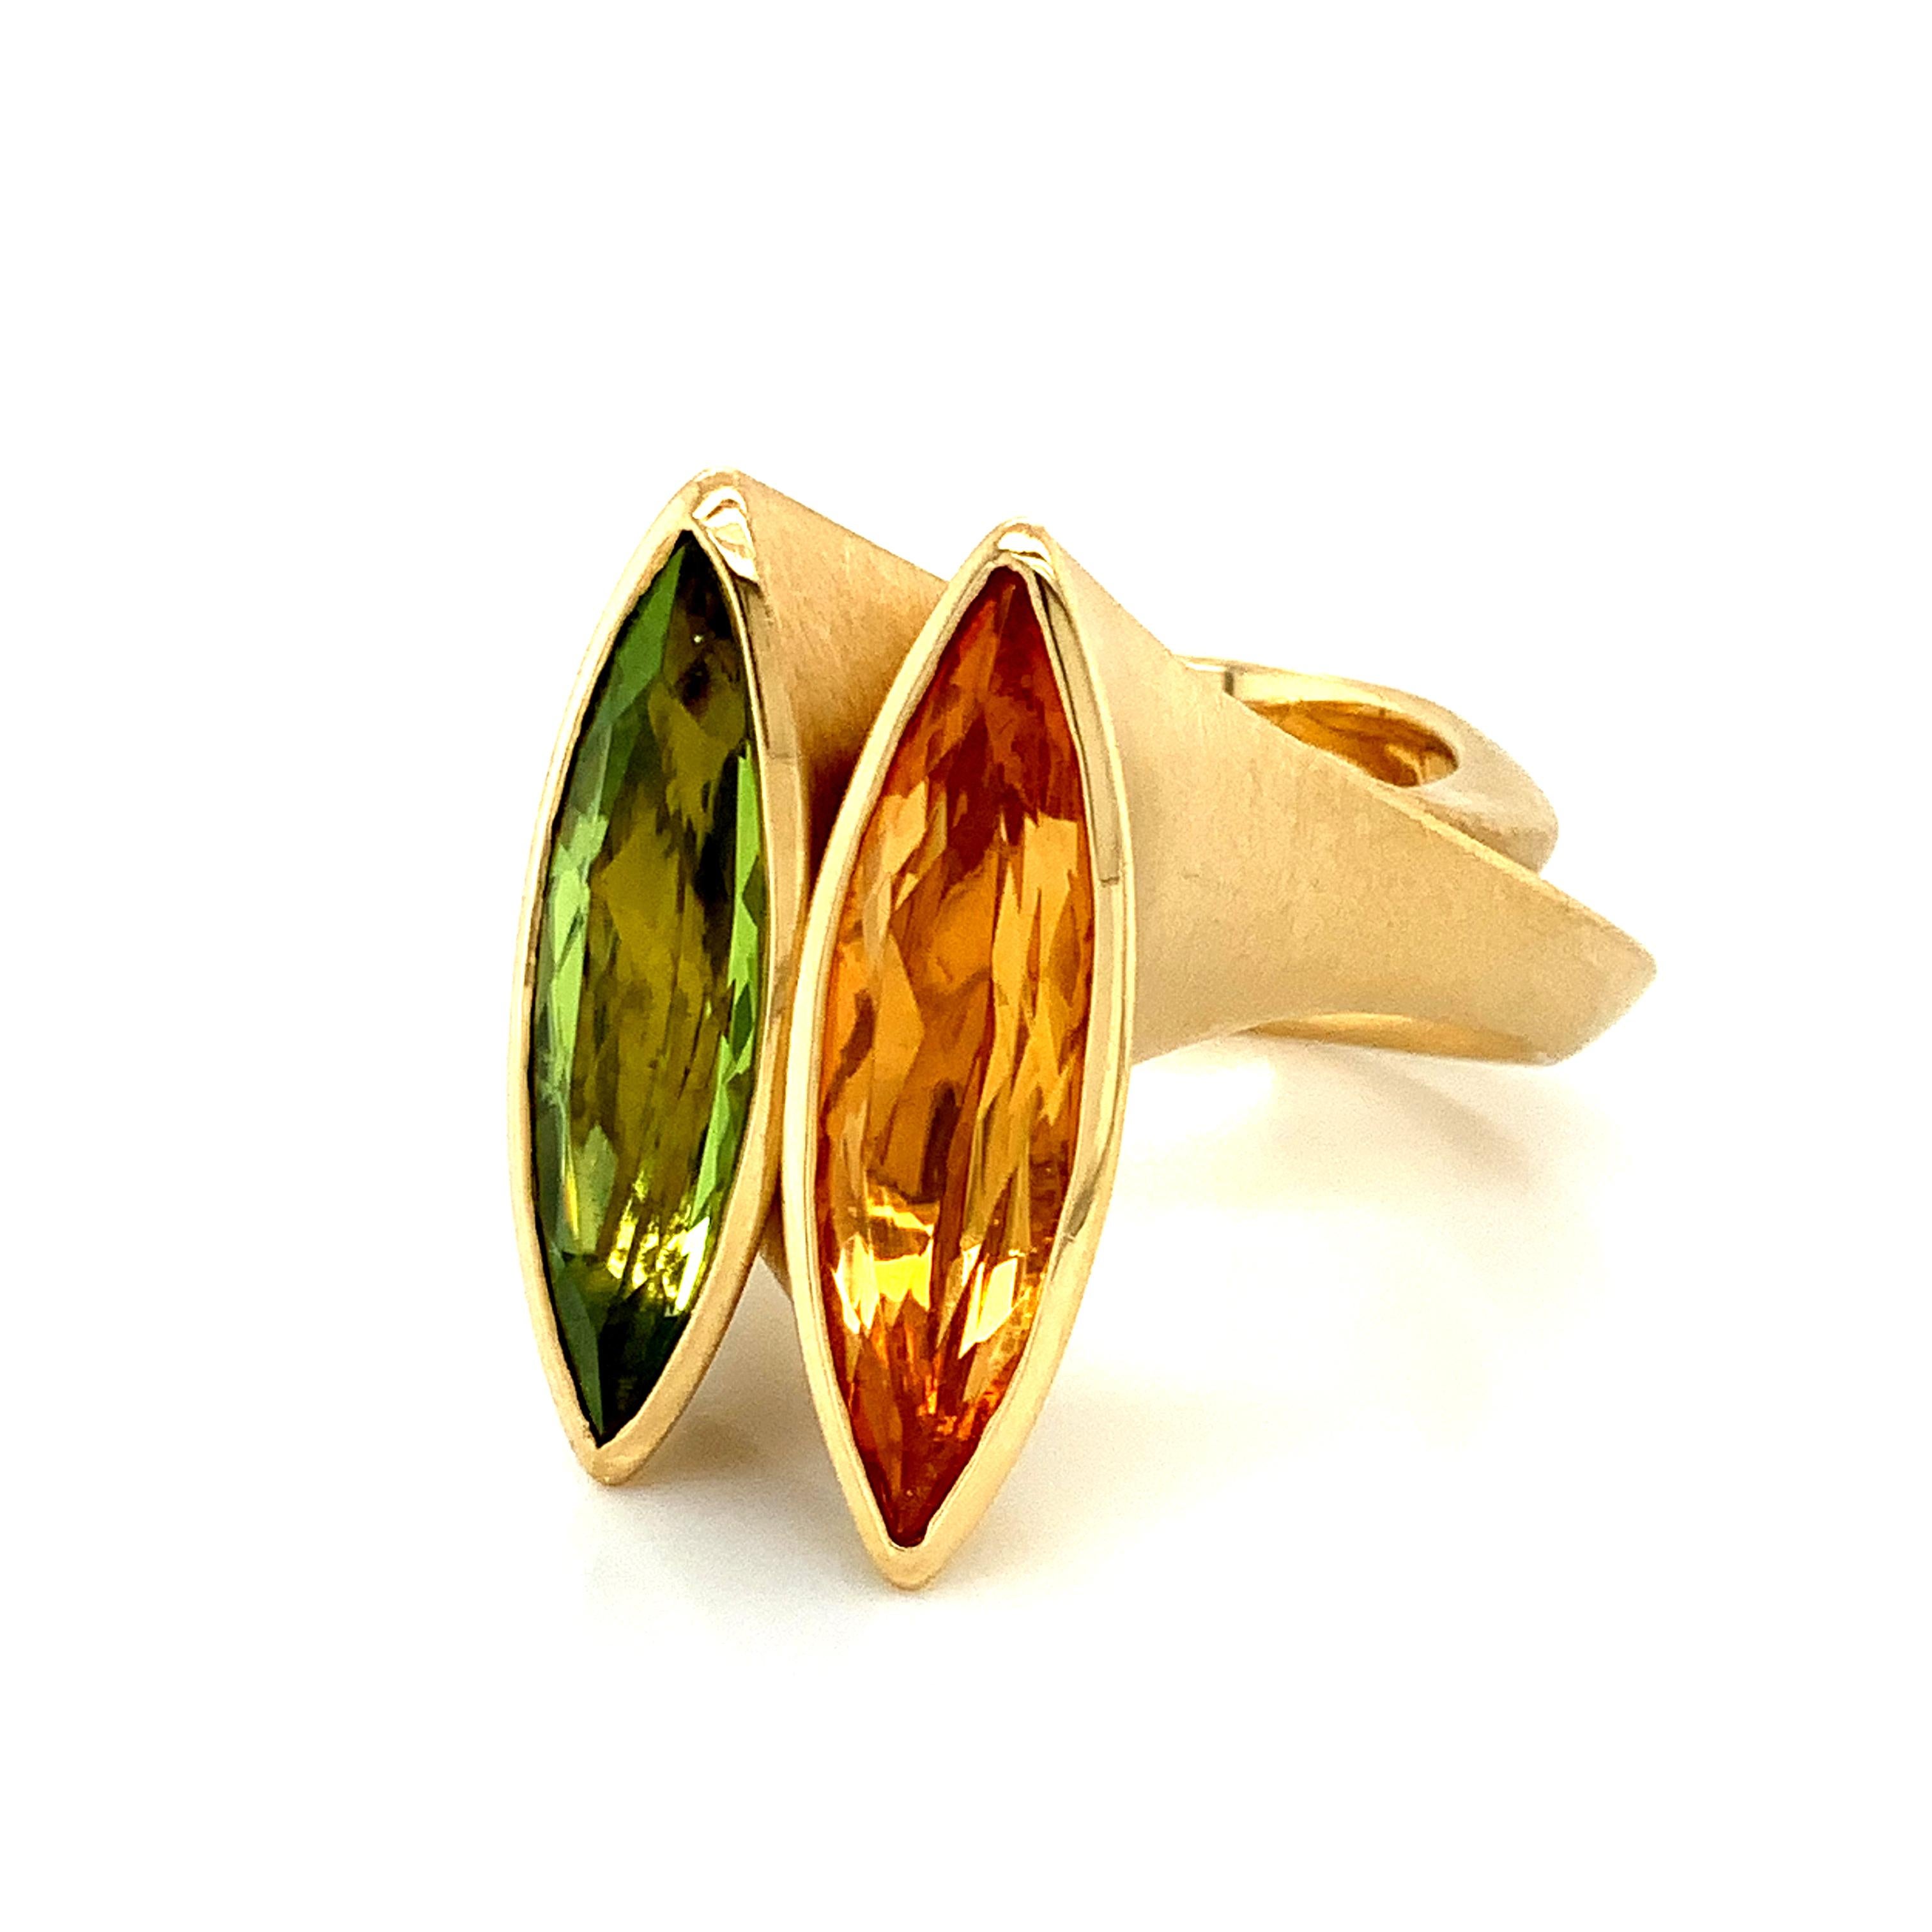  Georg Spreng - Twist Ring 18 Karat Yellow Gold with Green Tourmaline Marquise For Sale 1